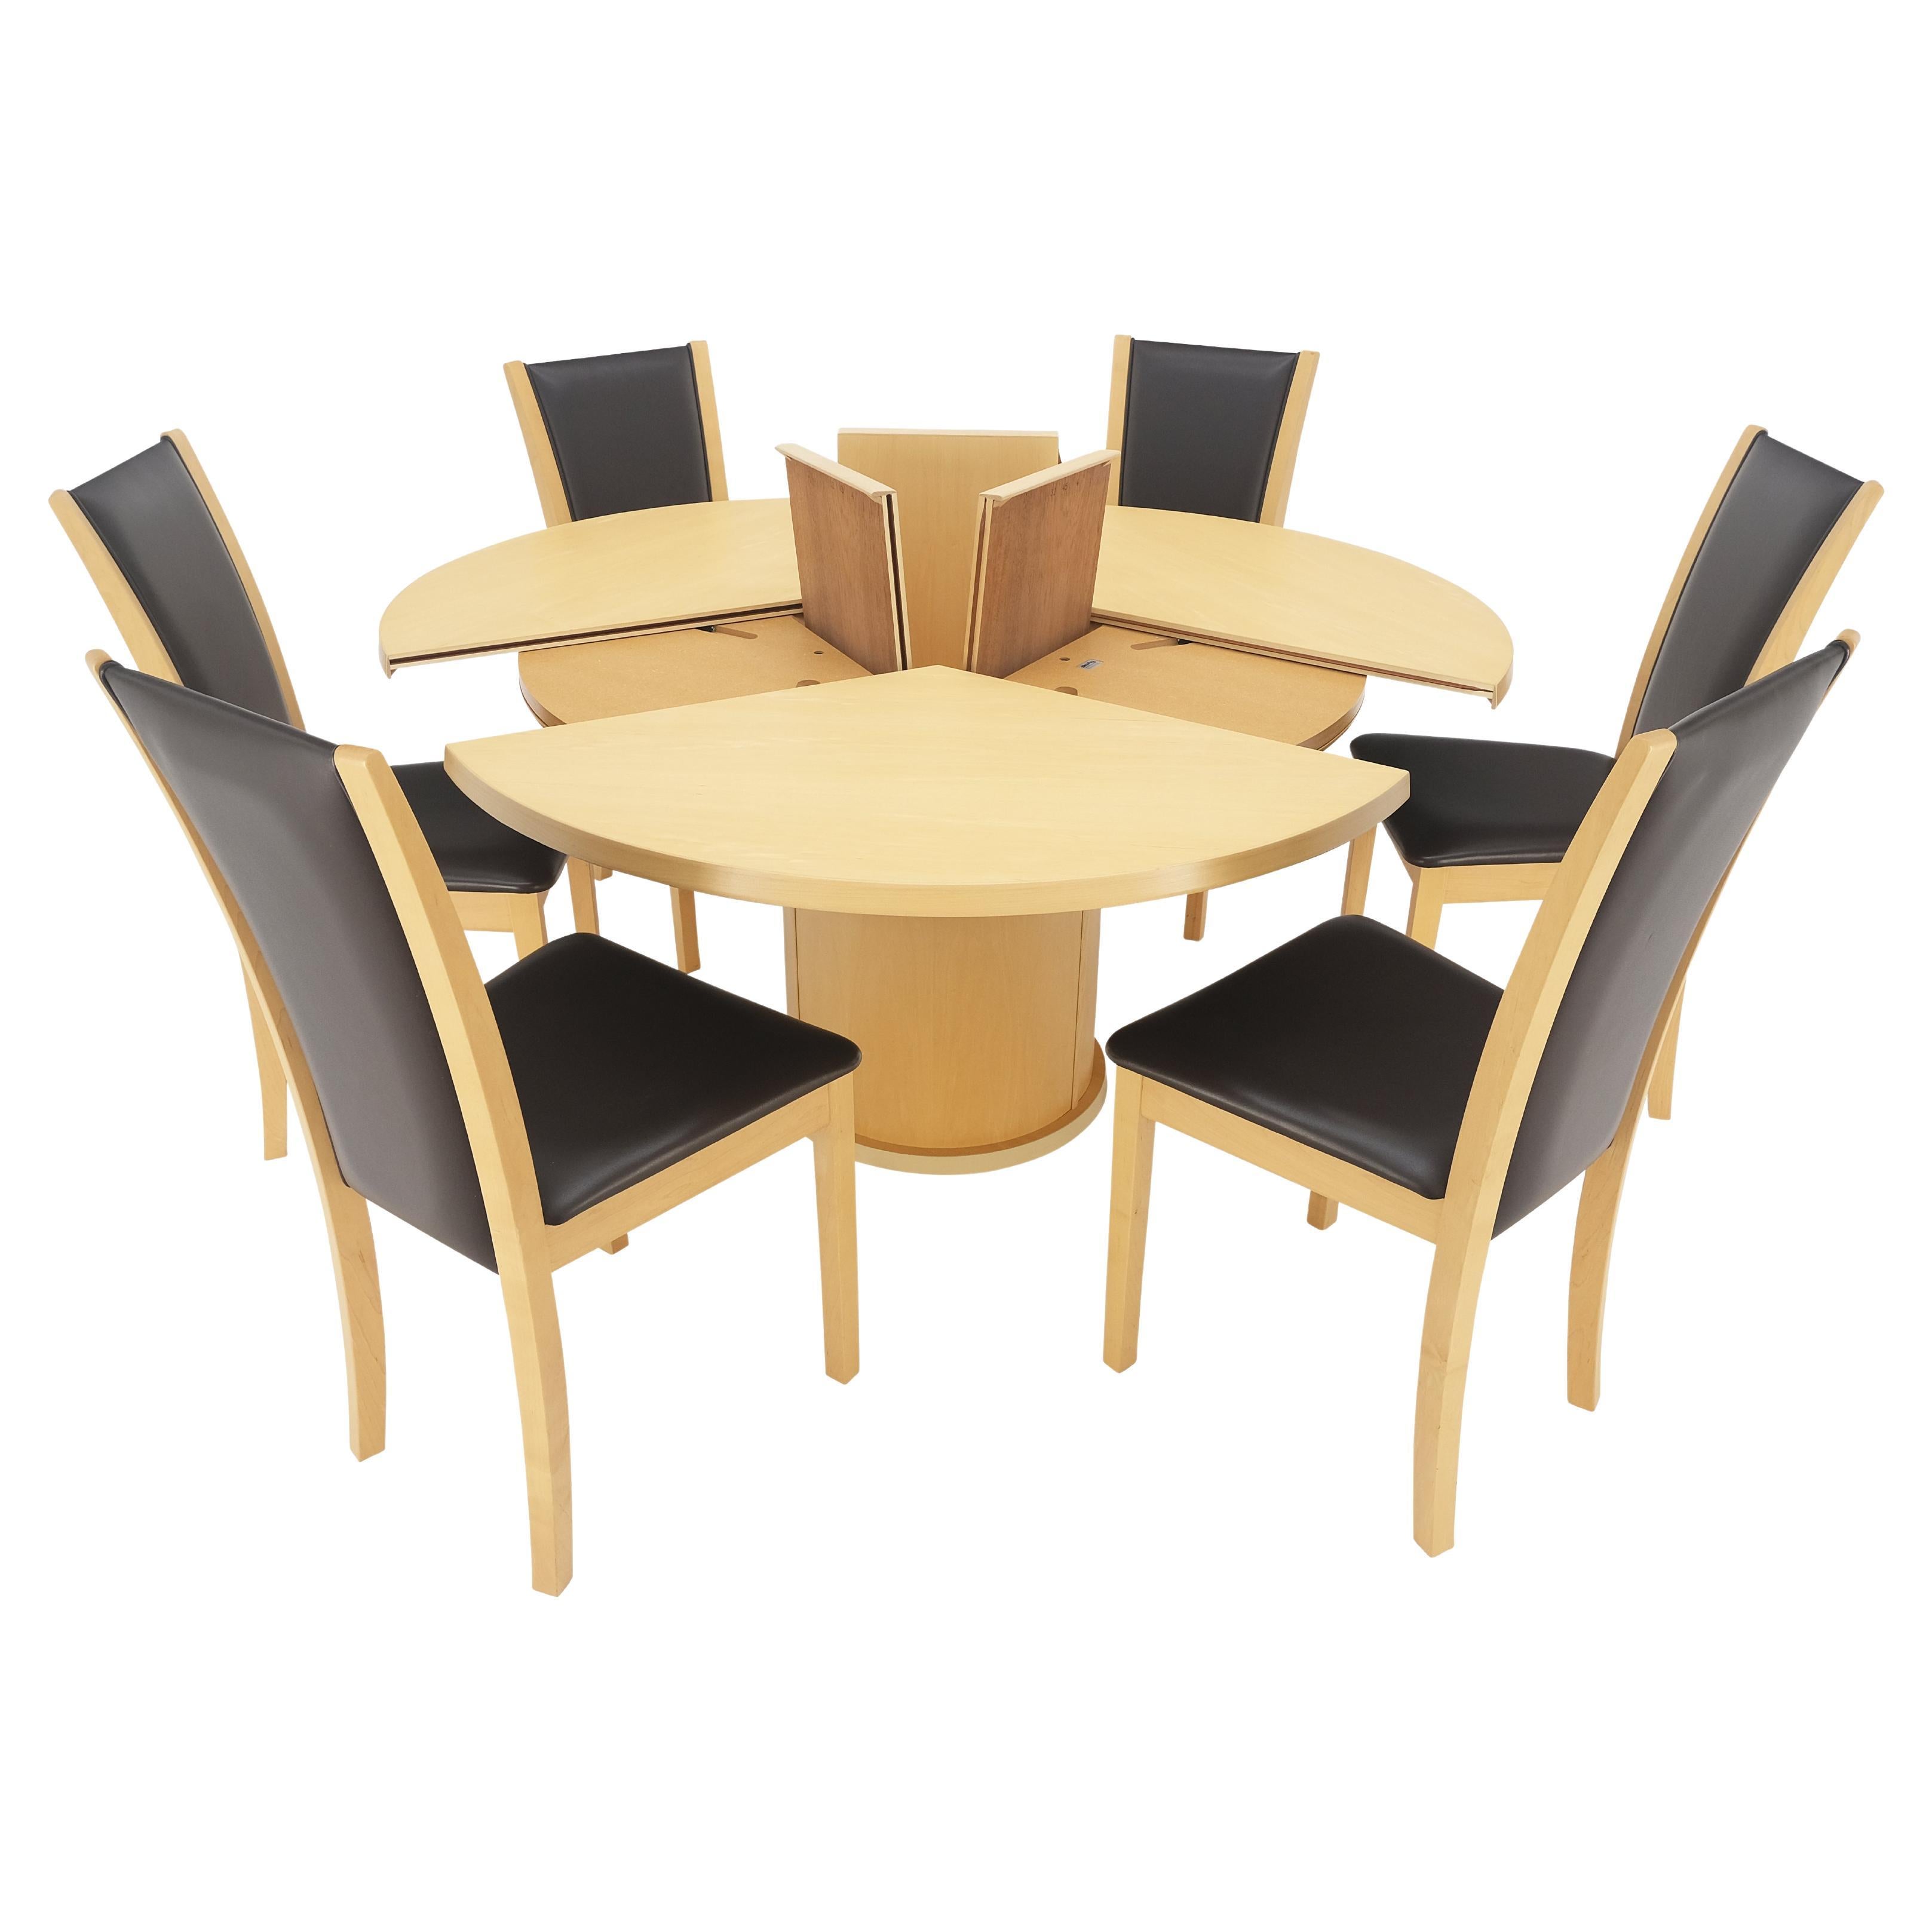 Rare Blond Maple Round Expandable Dining Table 6 Chairs Set Set Denmark MINT!  For Sale